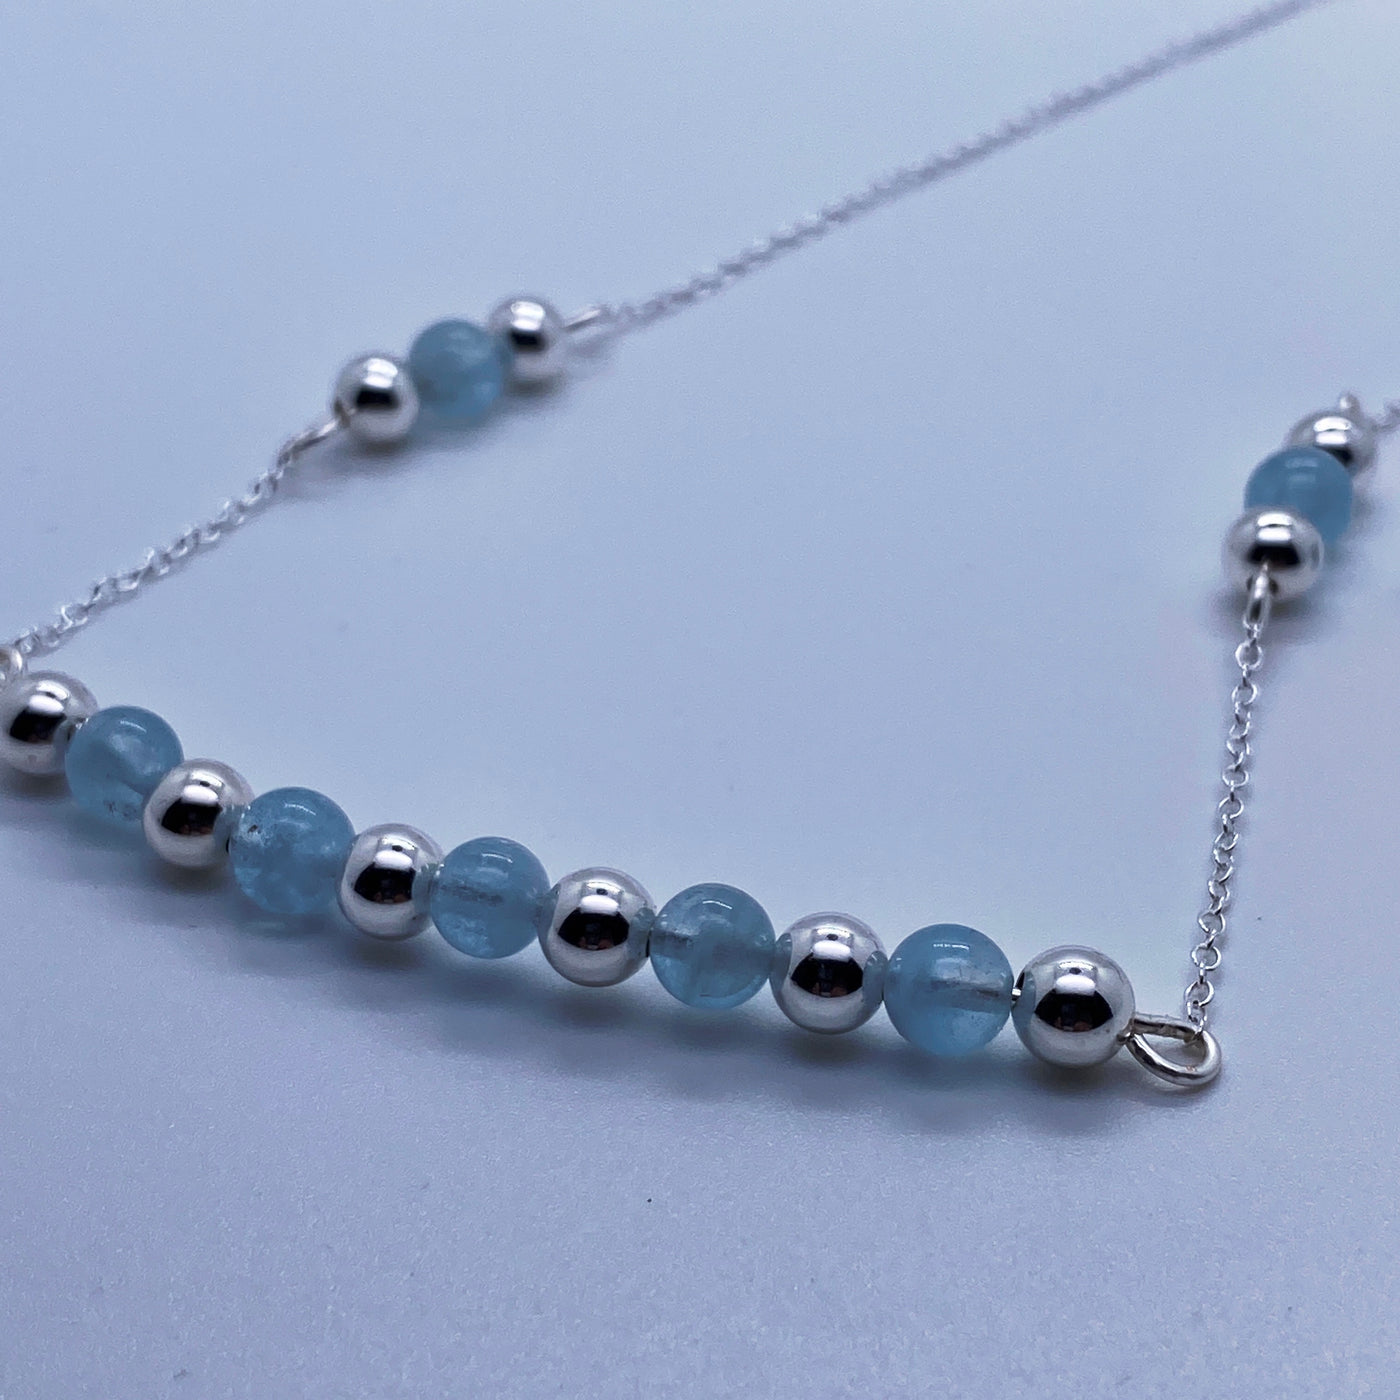 Acquamarine and silver beads on silver chain necklace